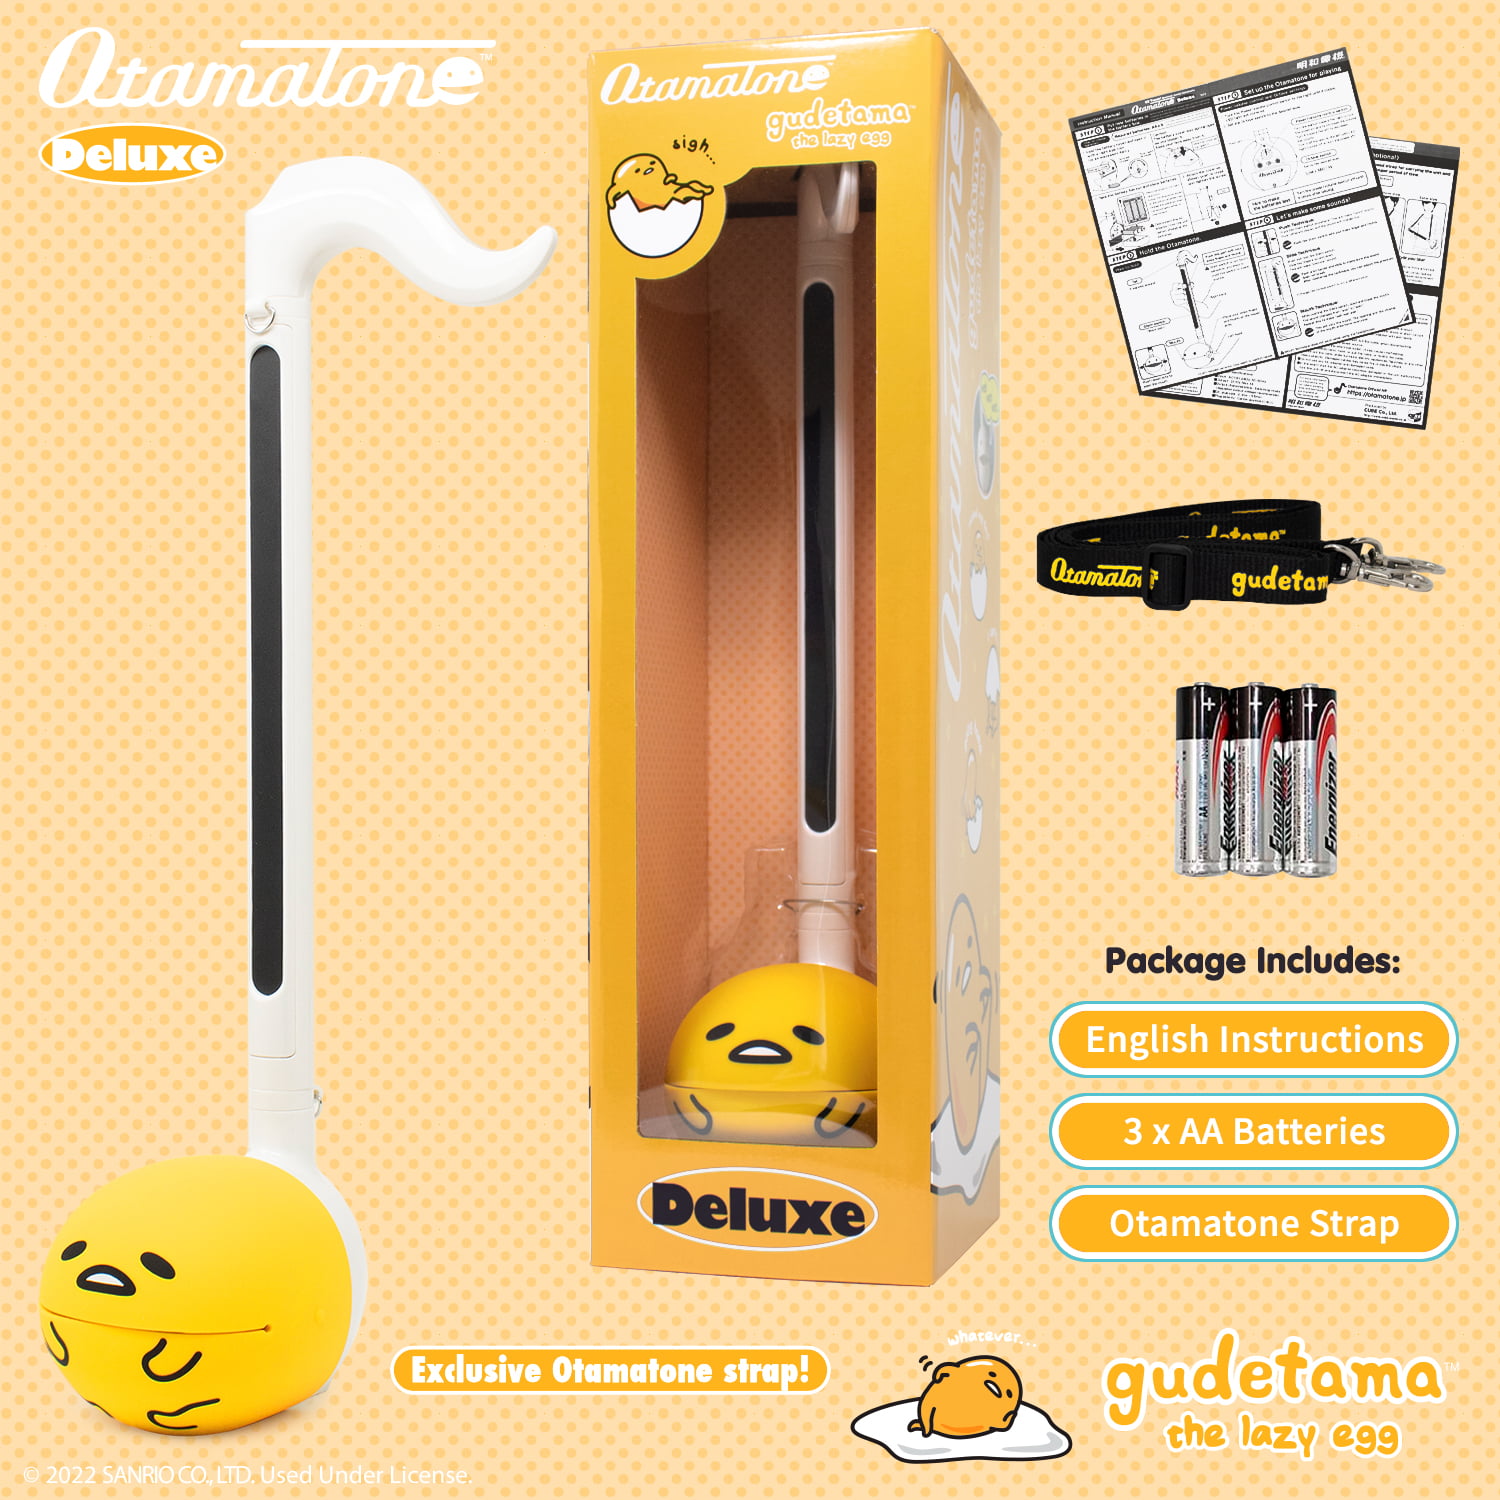 Otamatone 'Deluxe' [Japanese Edition] Electronic Musical Instrument Synthes